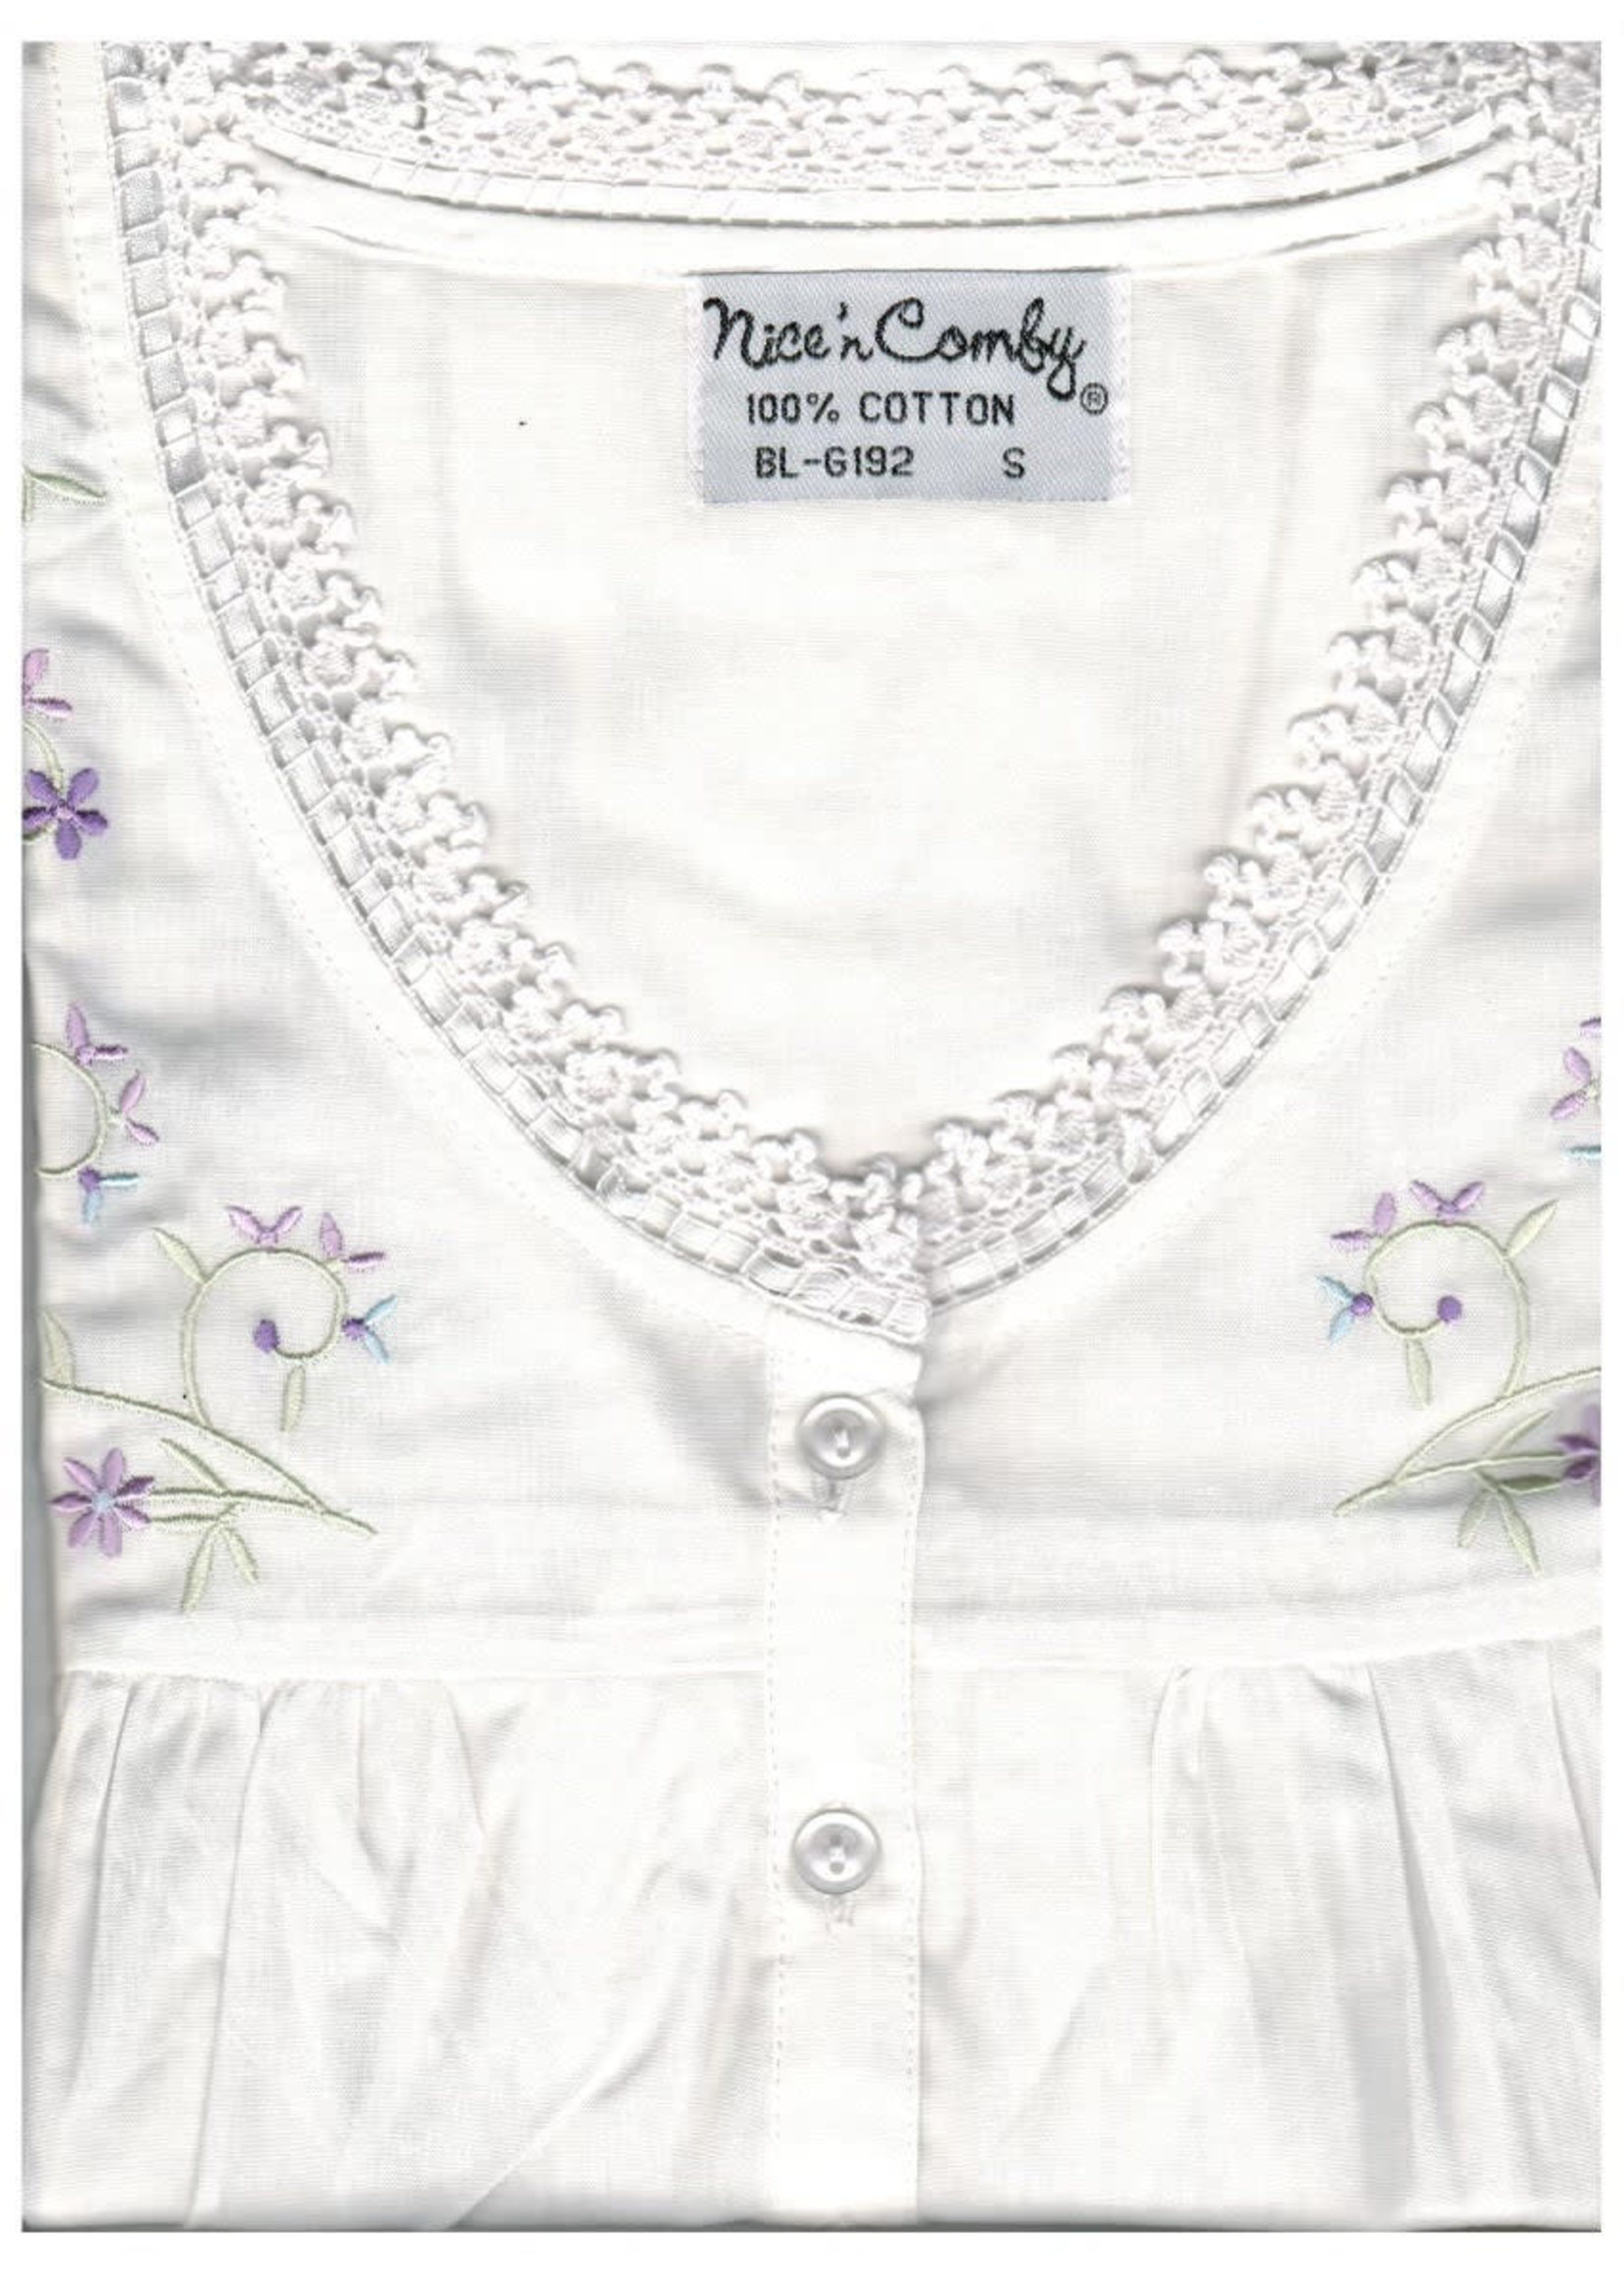 Nice n' Comfy Embroidered Cotton Nightgown with Purple Flowers